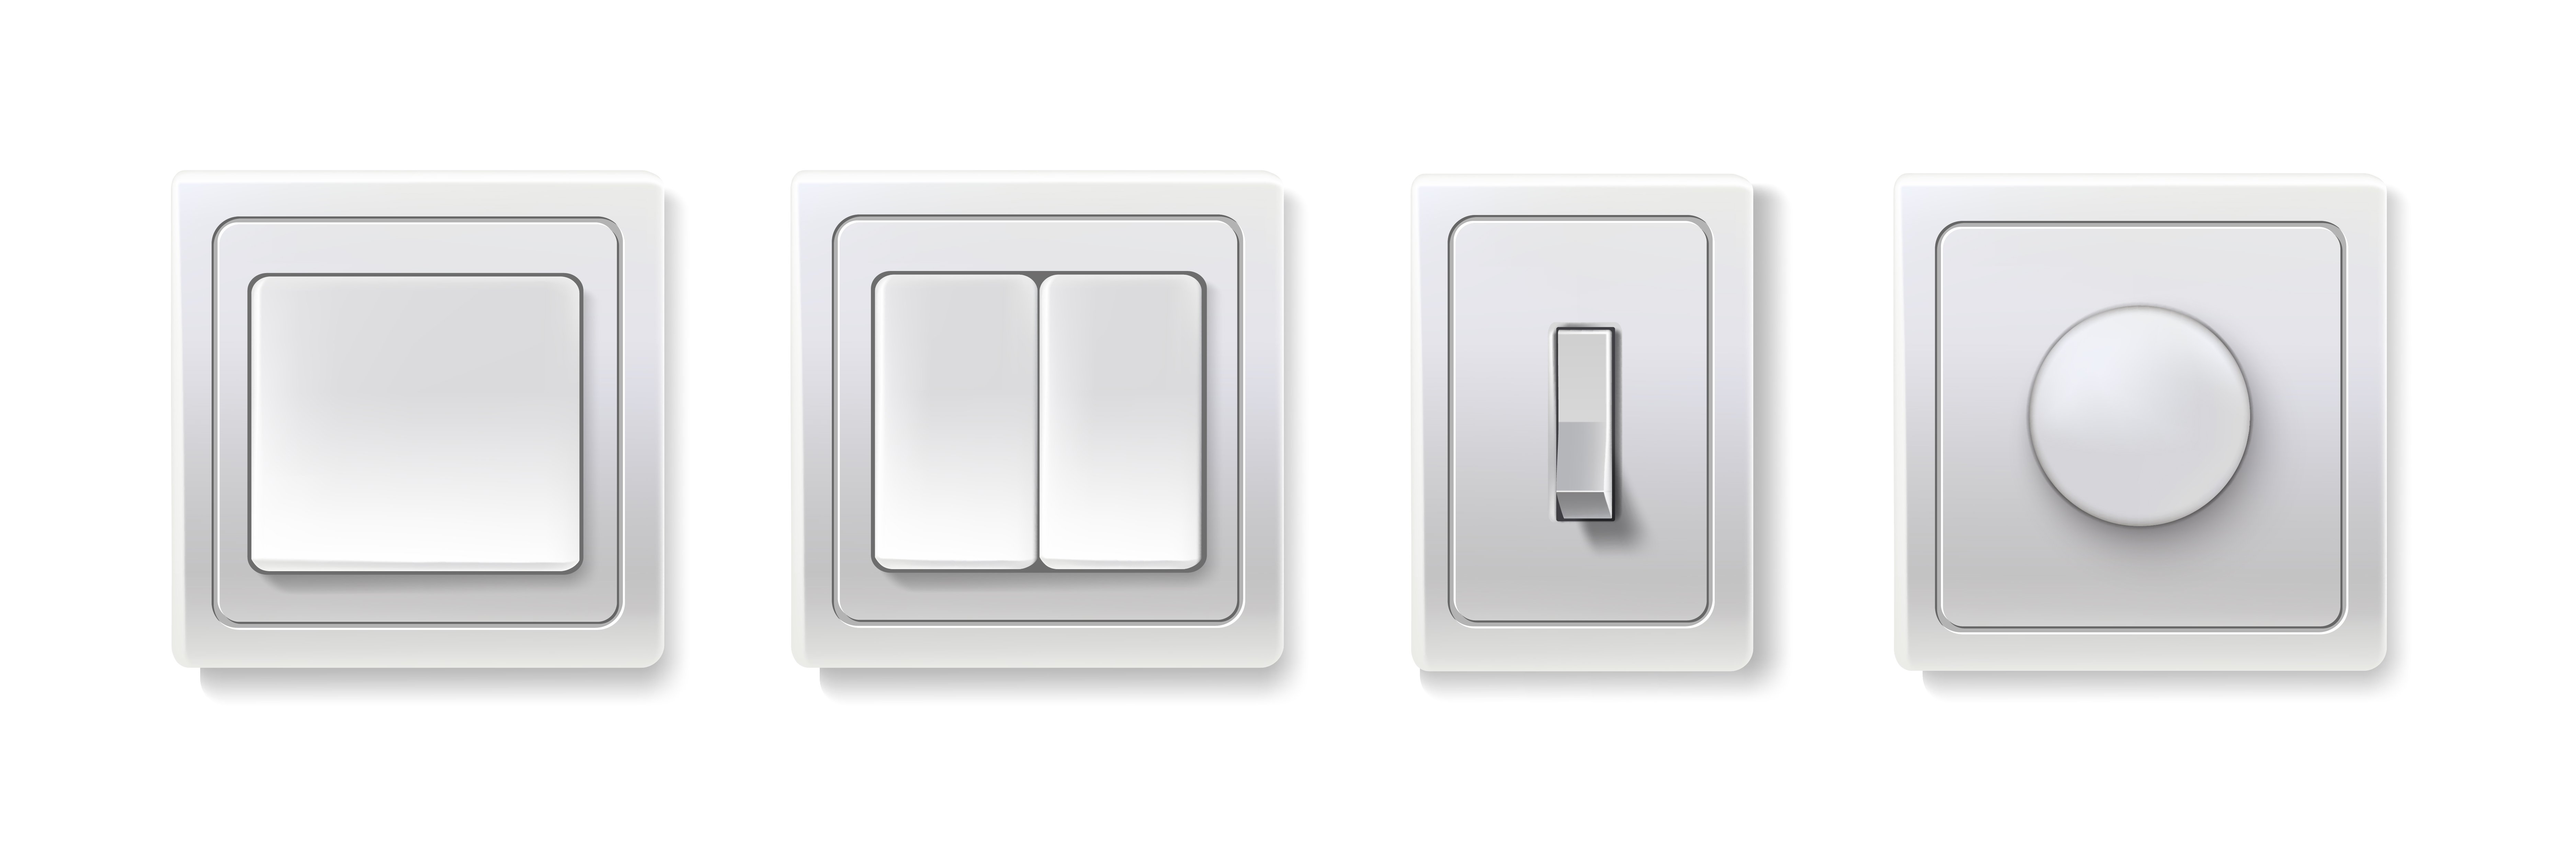 electrical_outlets_04